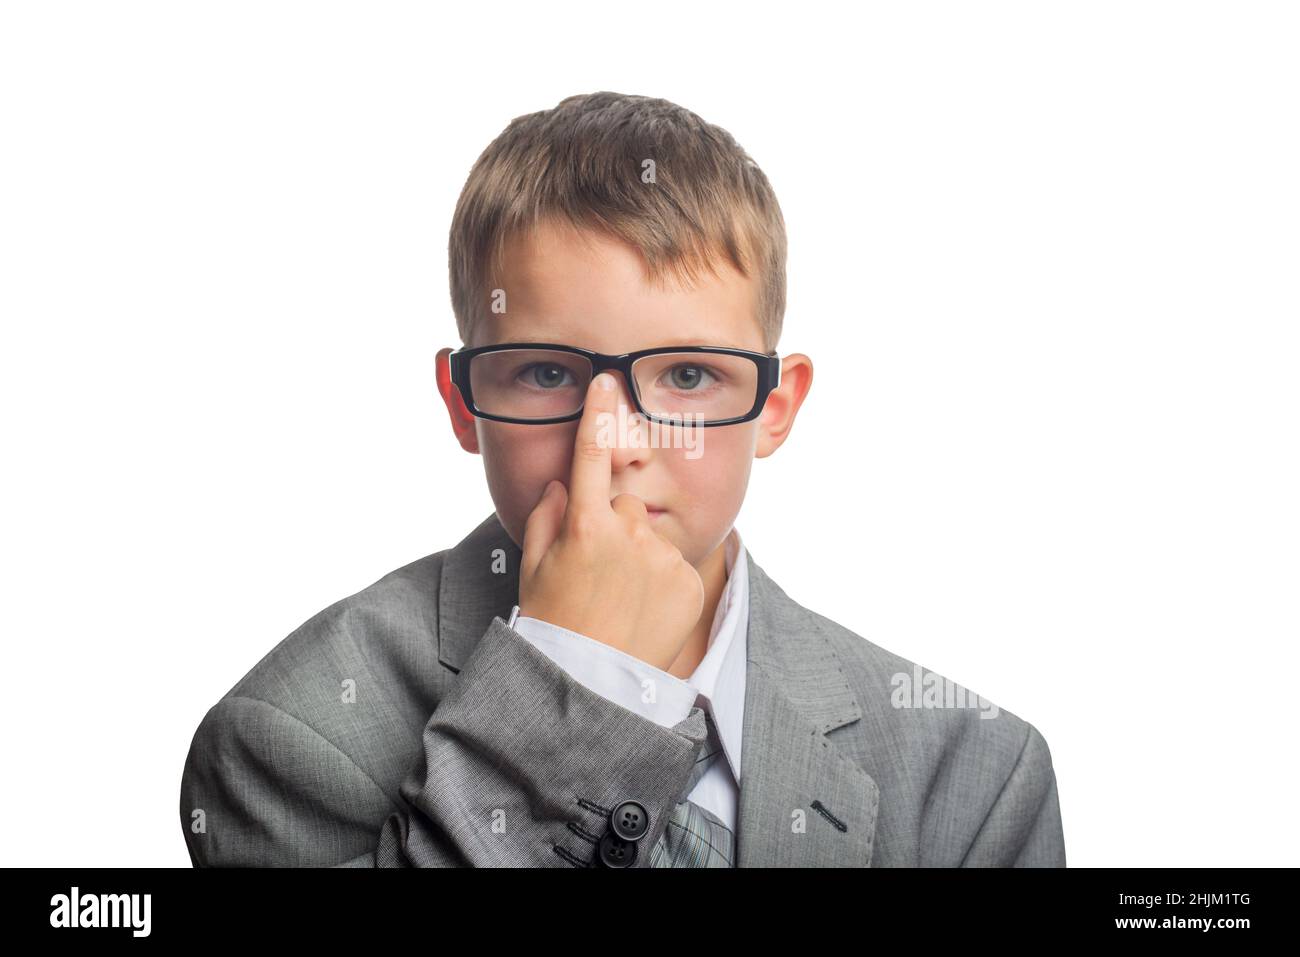 Child dressed as an adult businessman straightens glasses with his finger. Face of smart boy in glasses and adult suit isolated on white background. Stock Photo